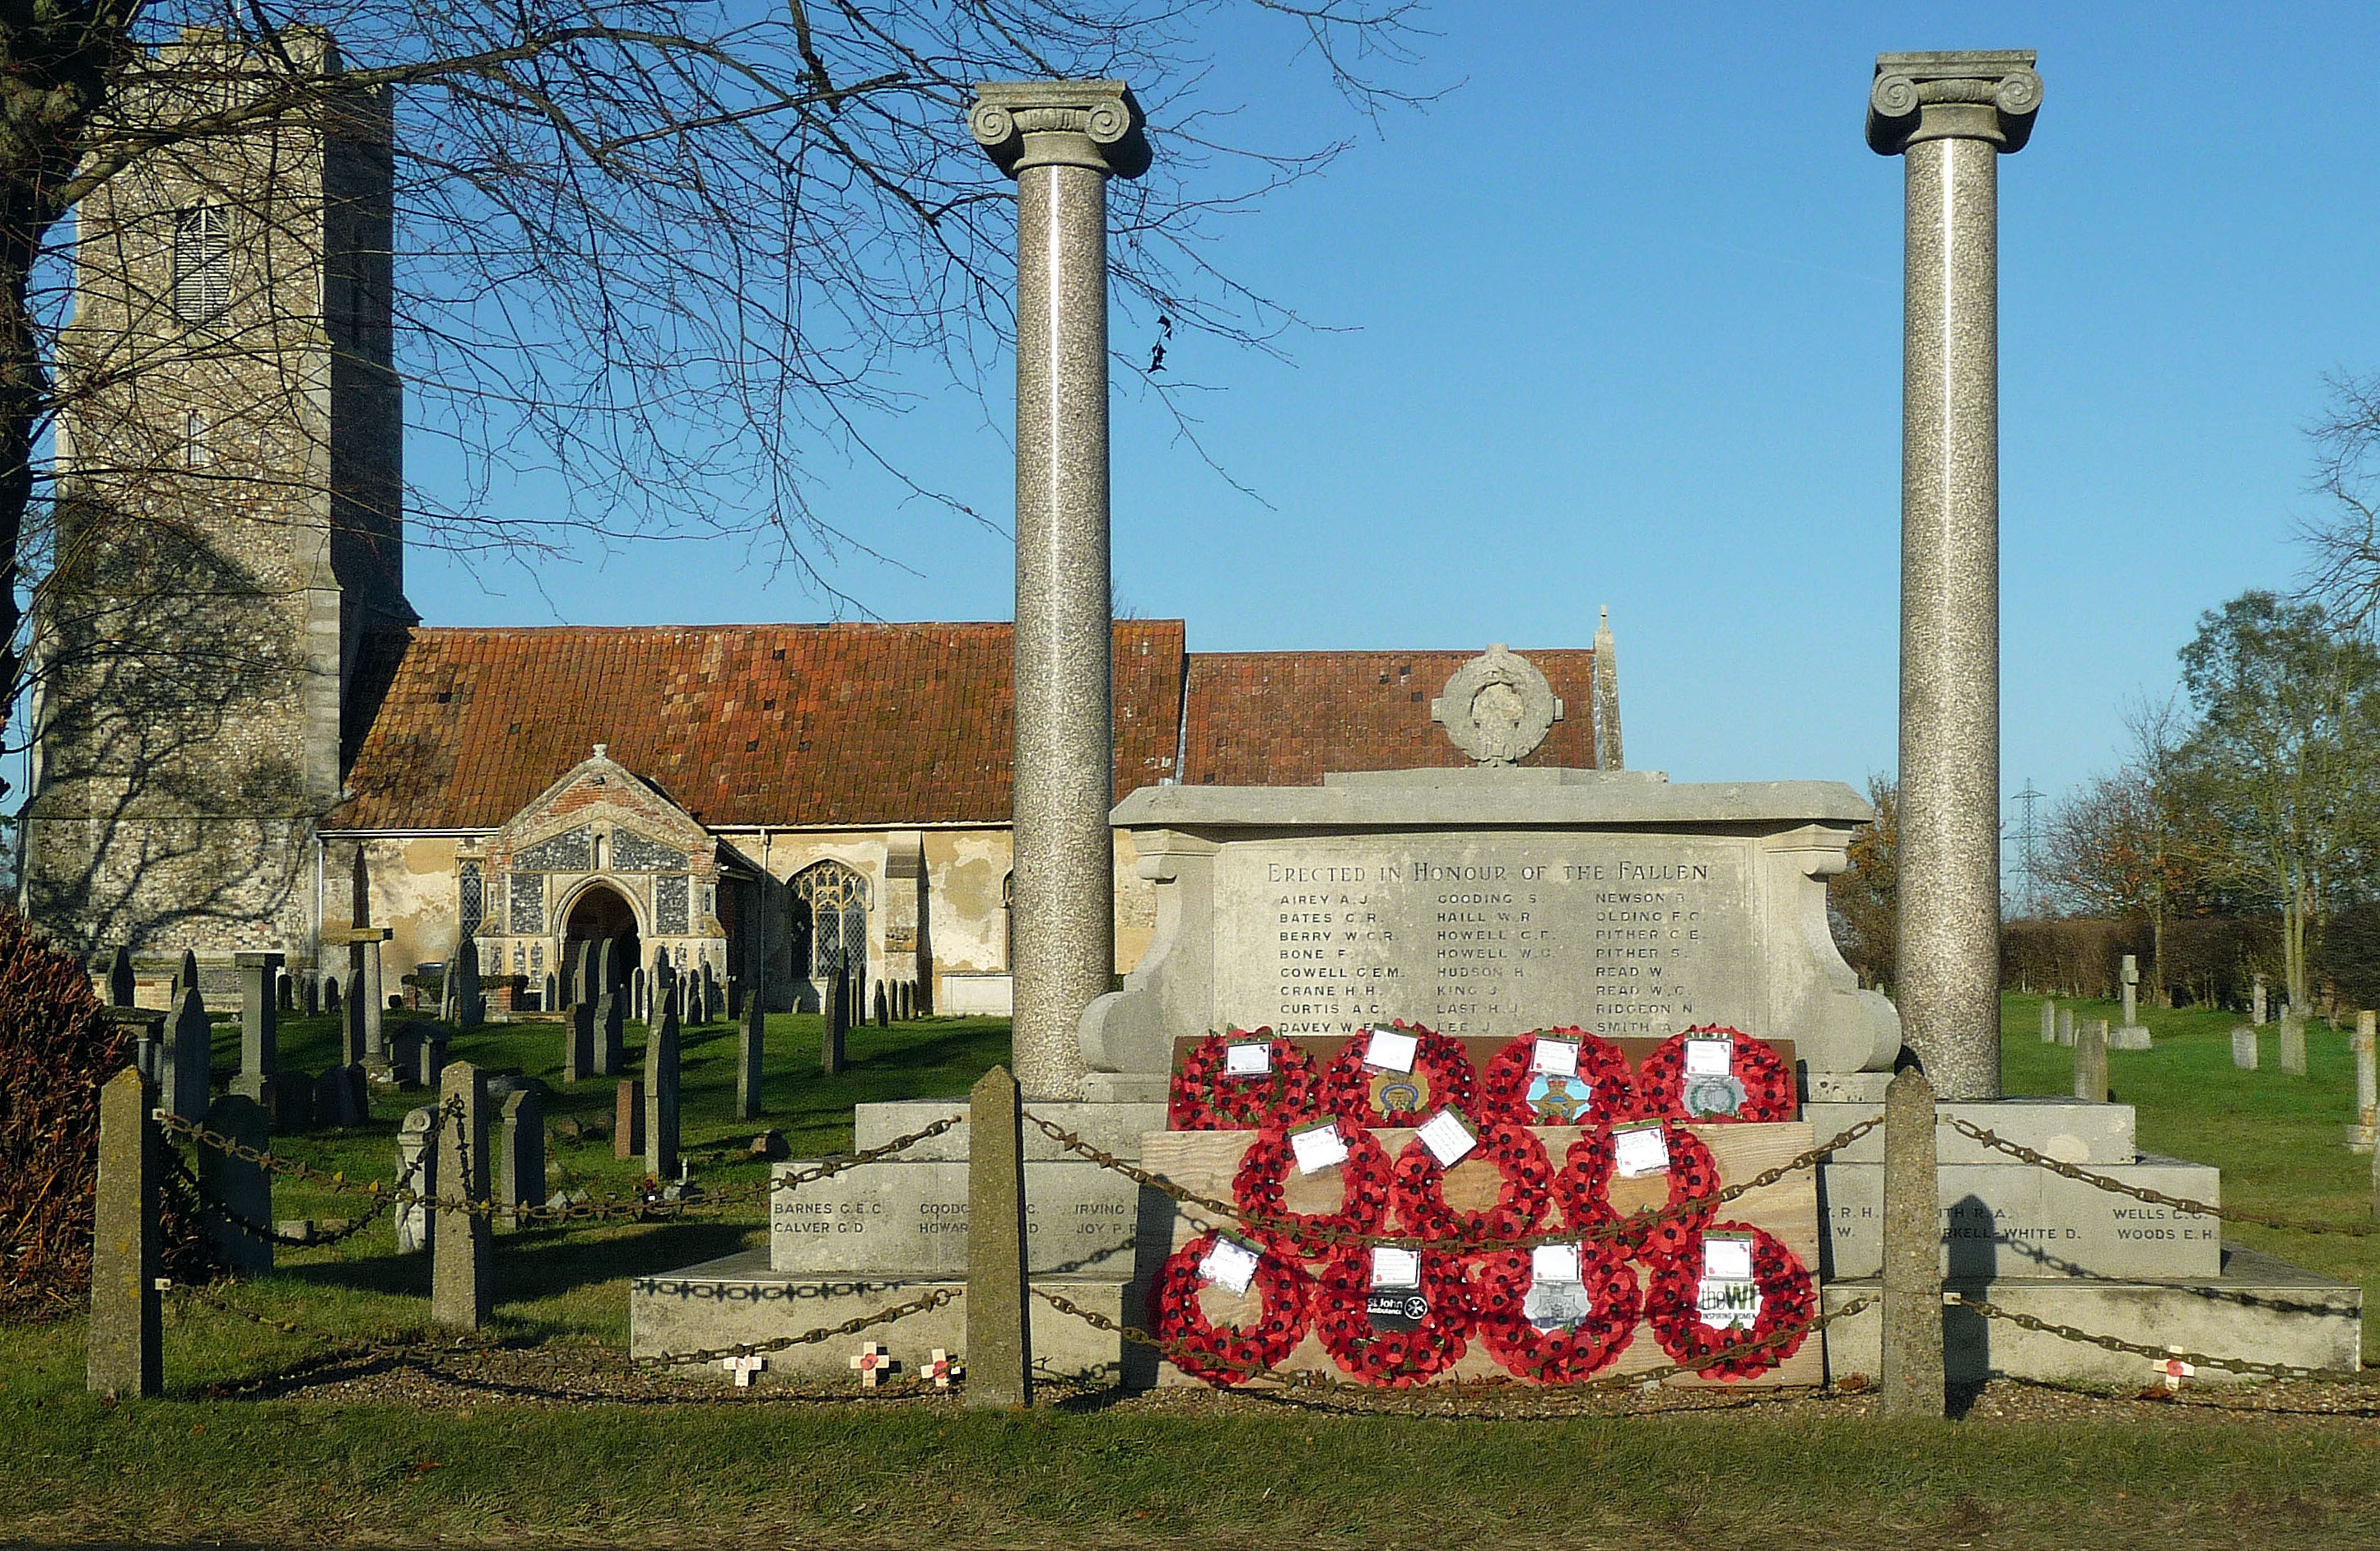 10:45 Remembrance Sunday at Snape